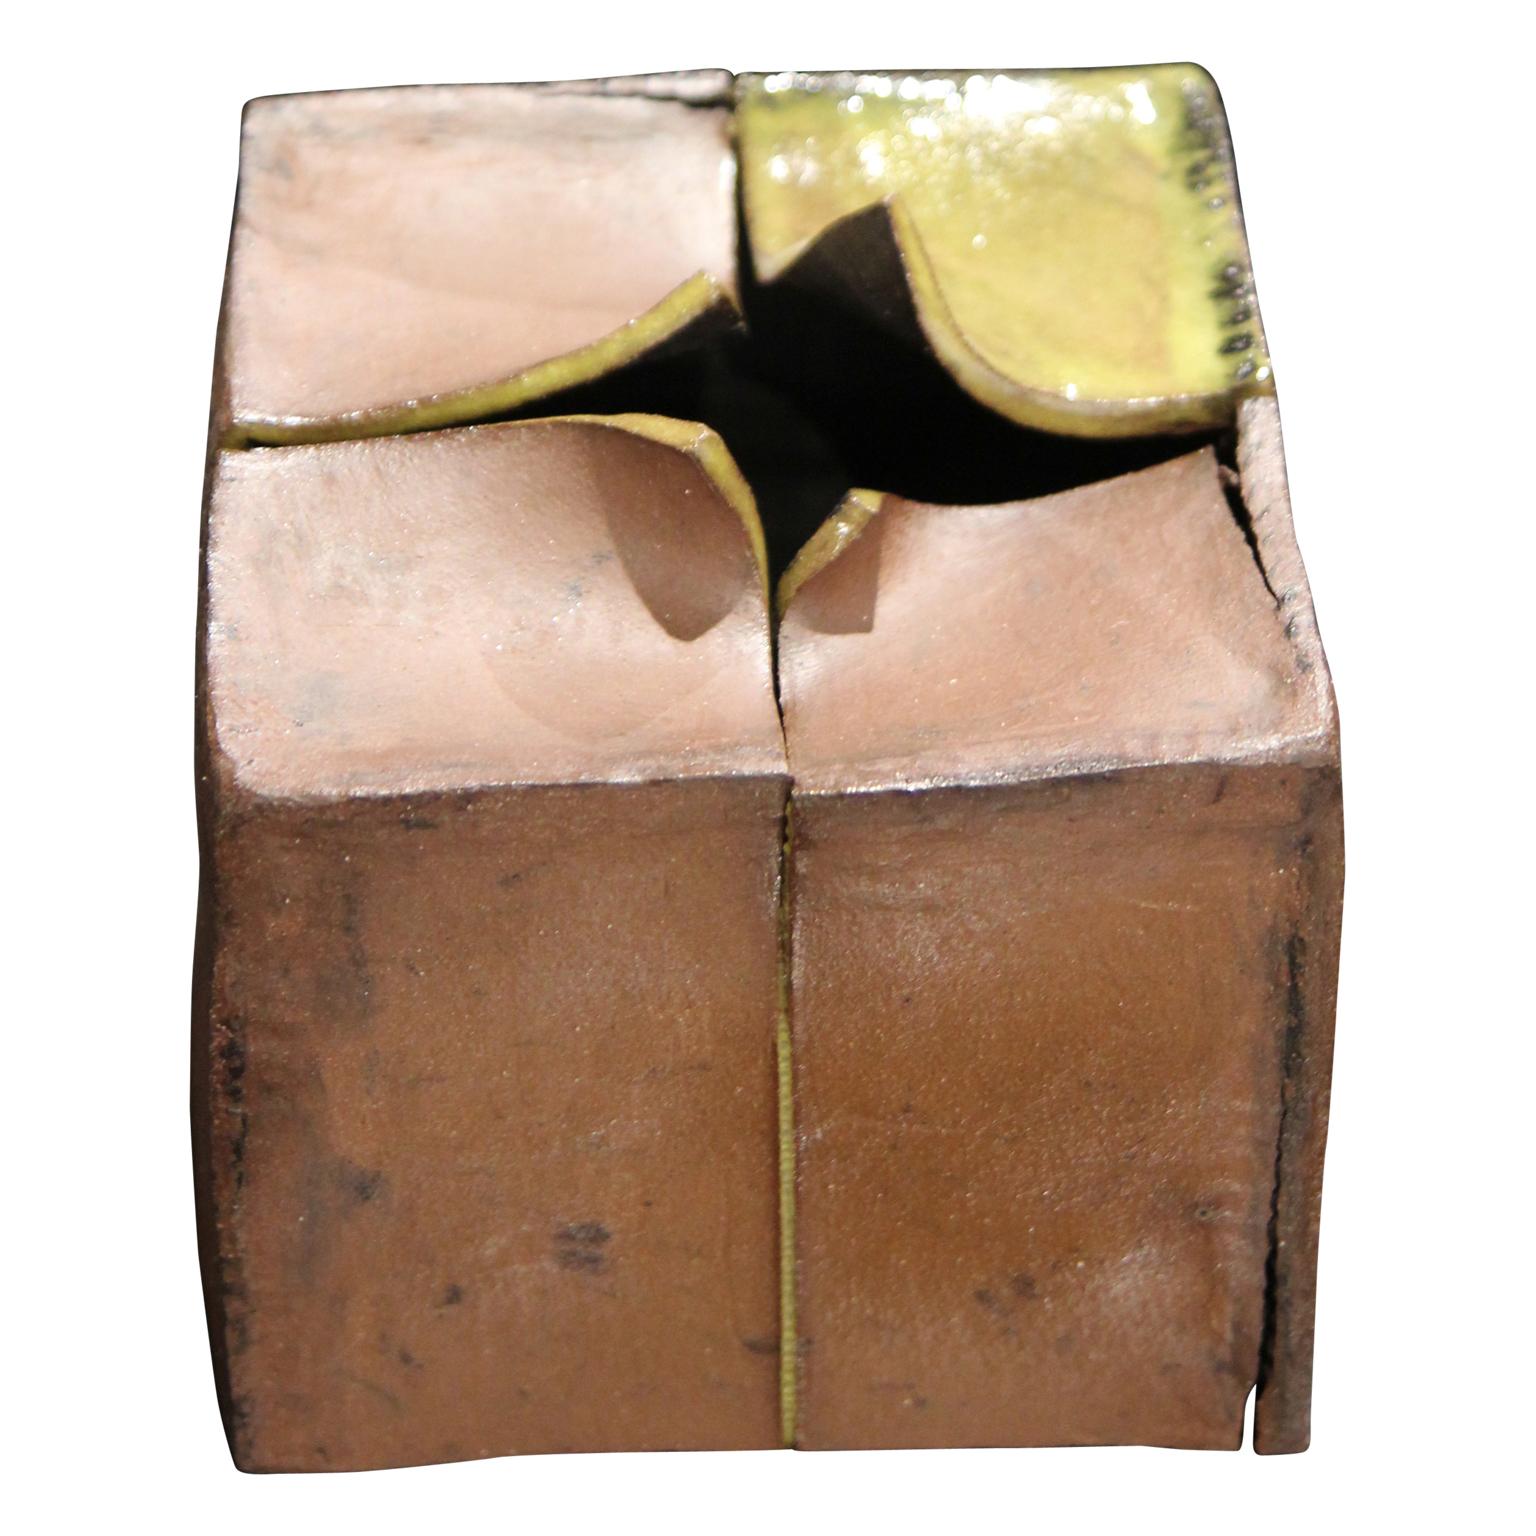 Minimalist style distressed ceramic box created by Houston Contemporary artist Josefina Barassi who is apart of the Glassel School of Art in Houston Texas. She intentionally creates her boxes to look torn open or falling in on itself. The sculpture